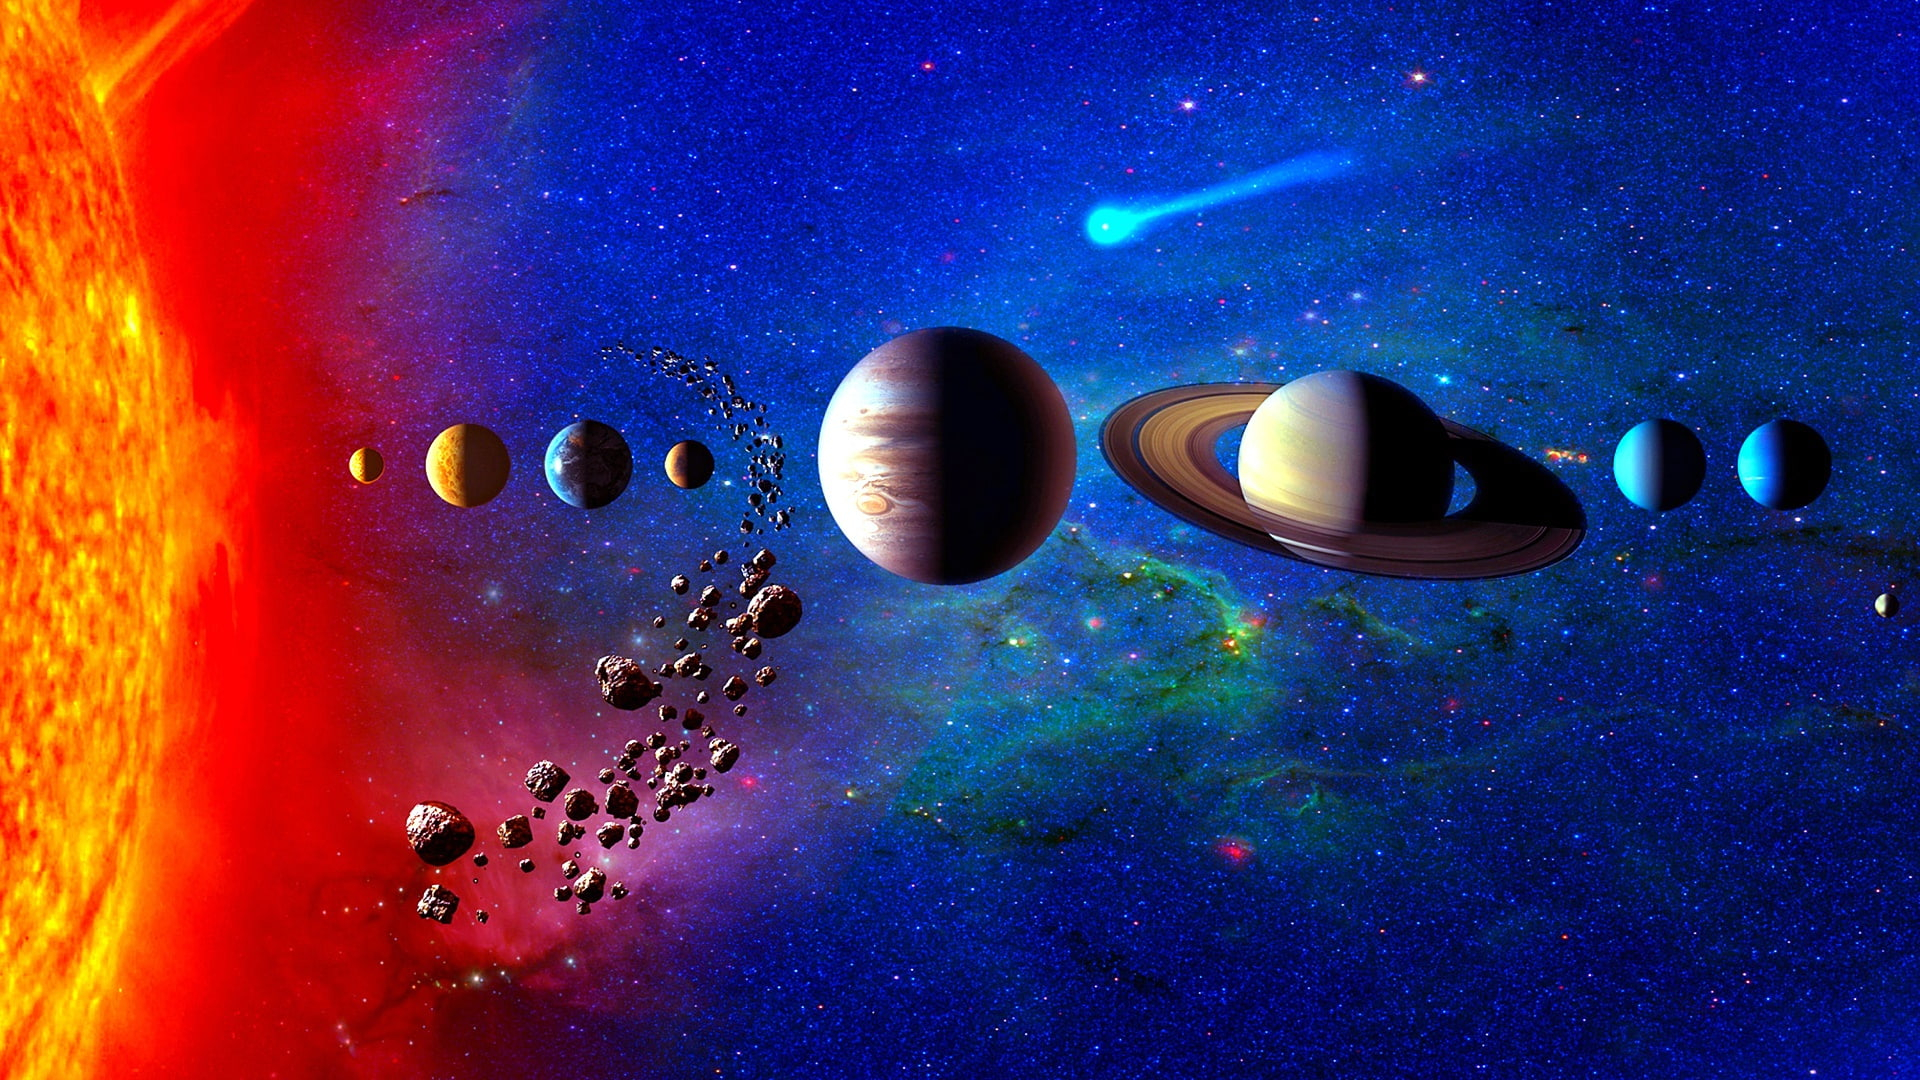 Solar system wallpaper, planetary system, space art, planets, universe